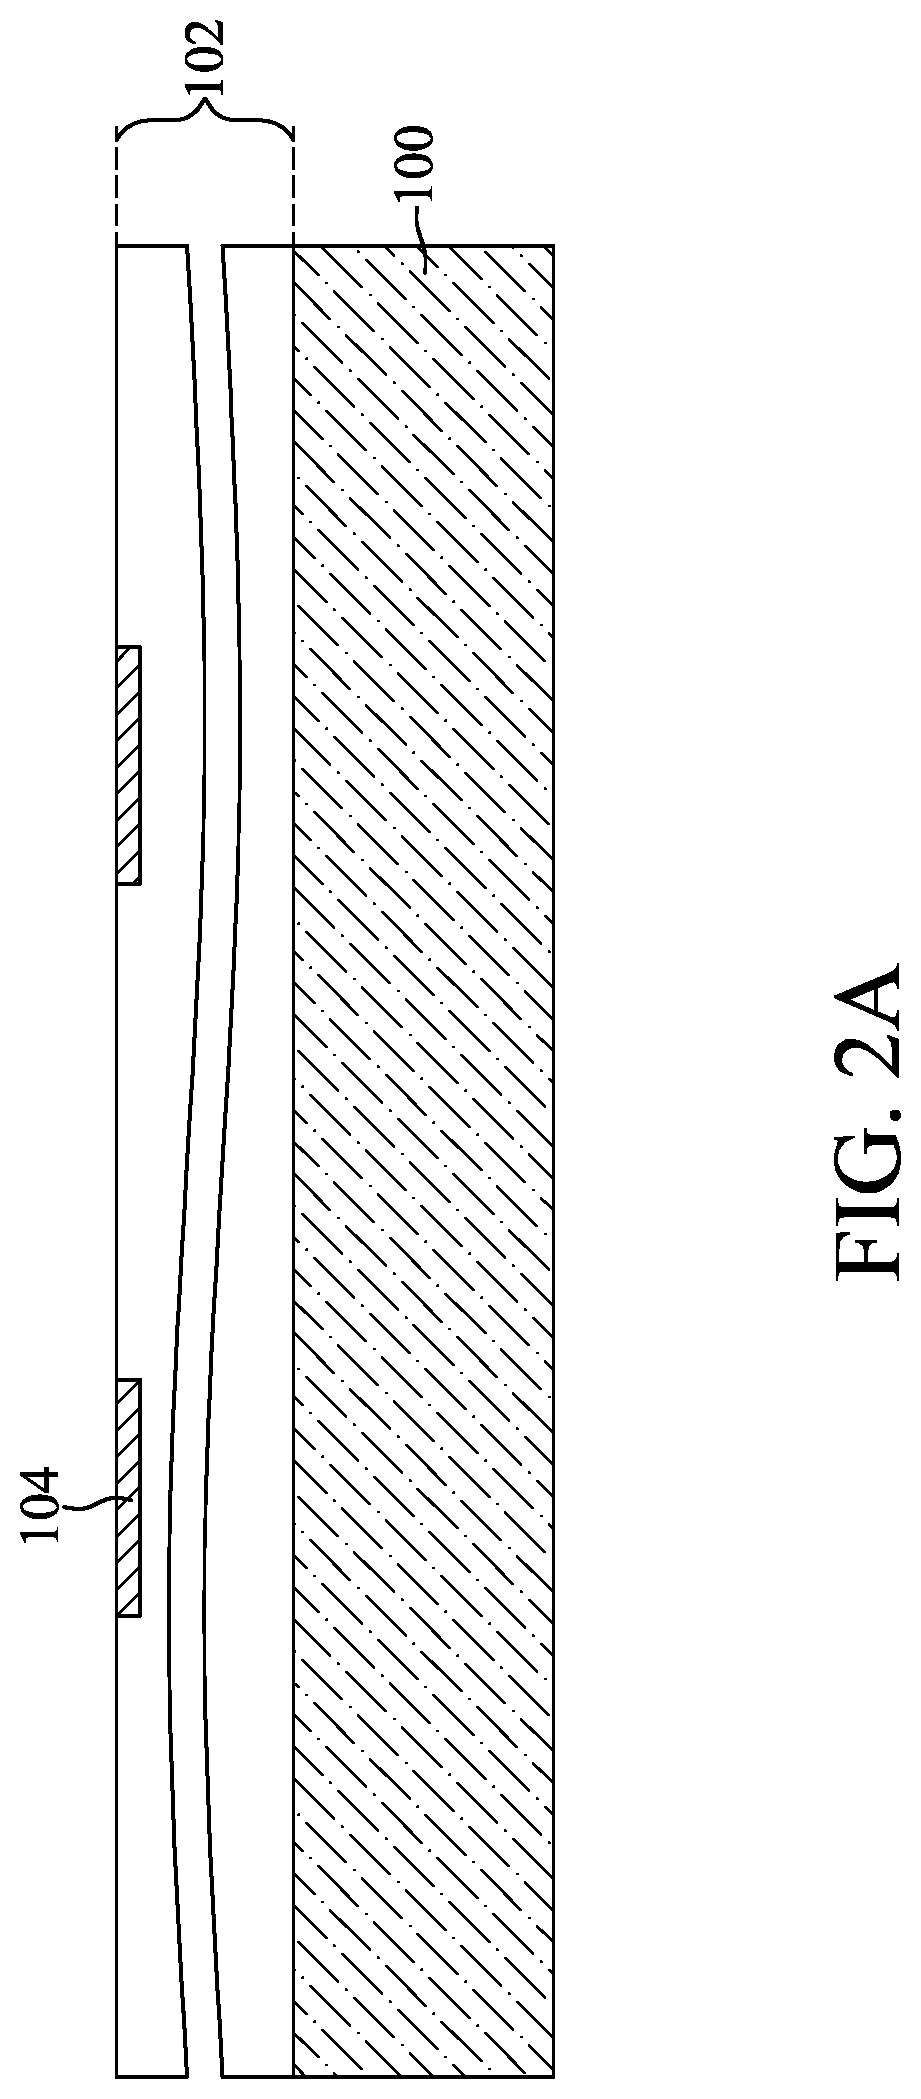 Method for manufacturing semiconductor package with air gap